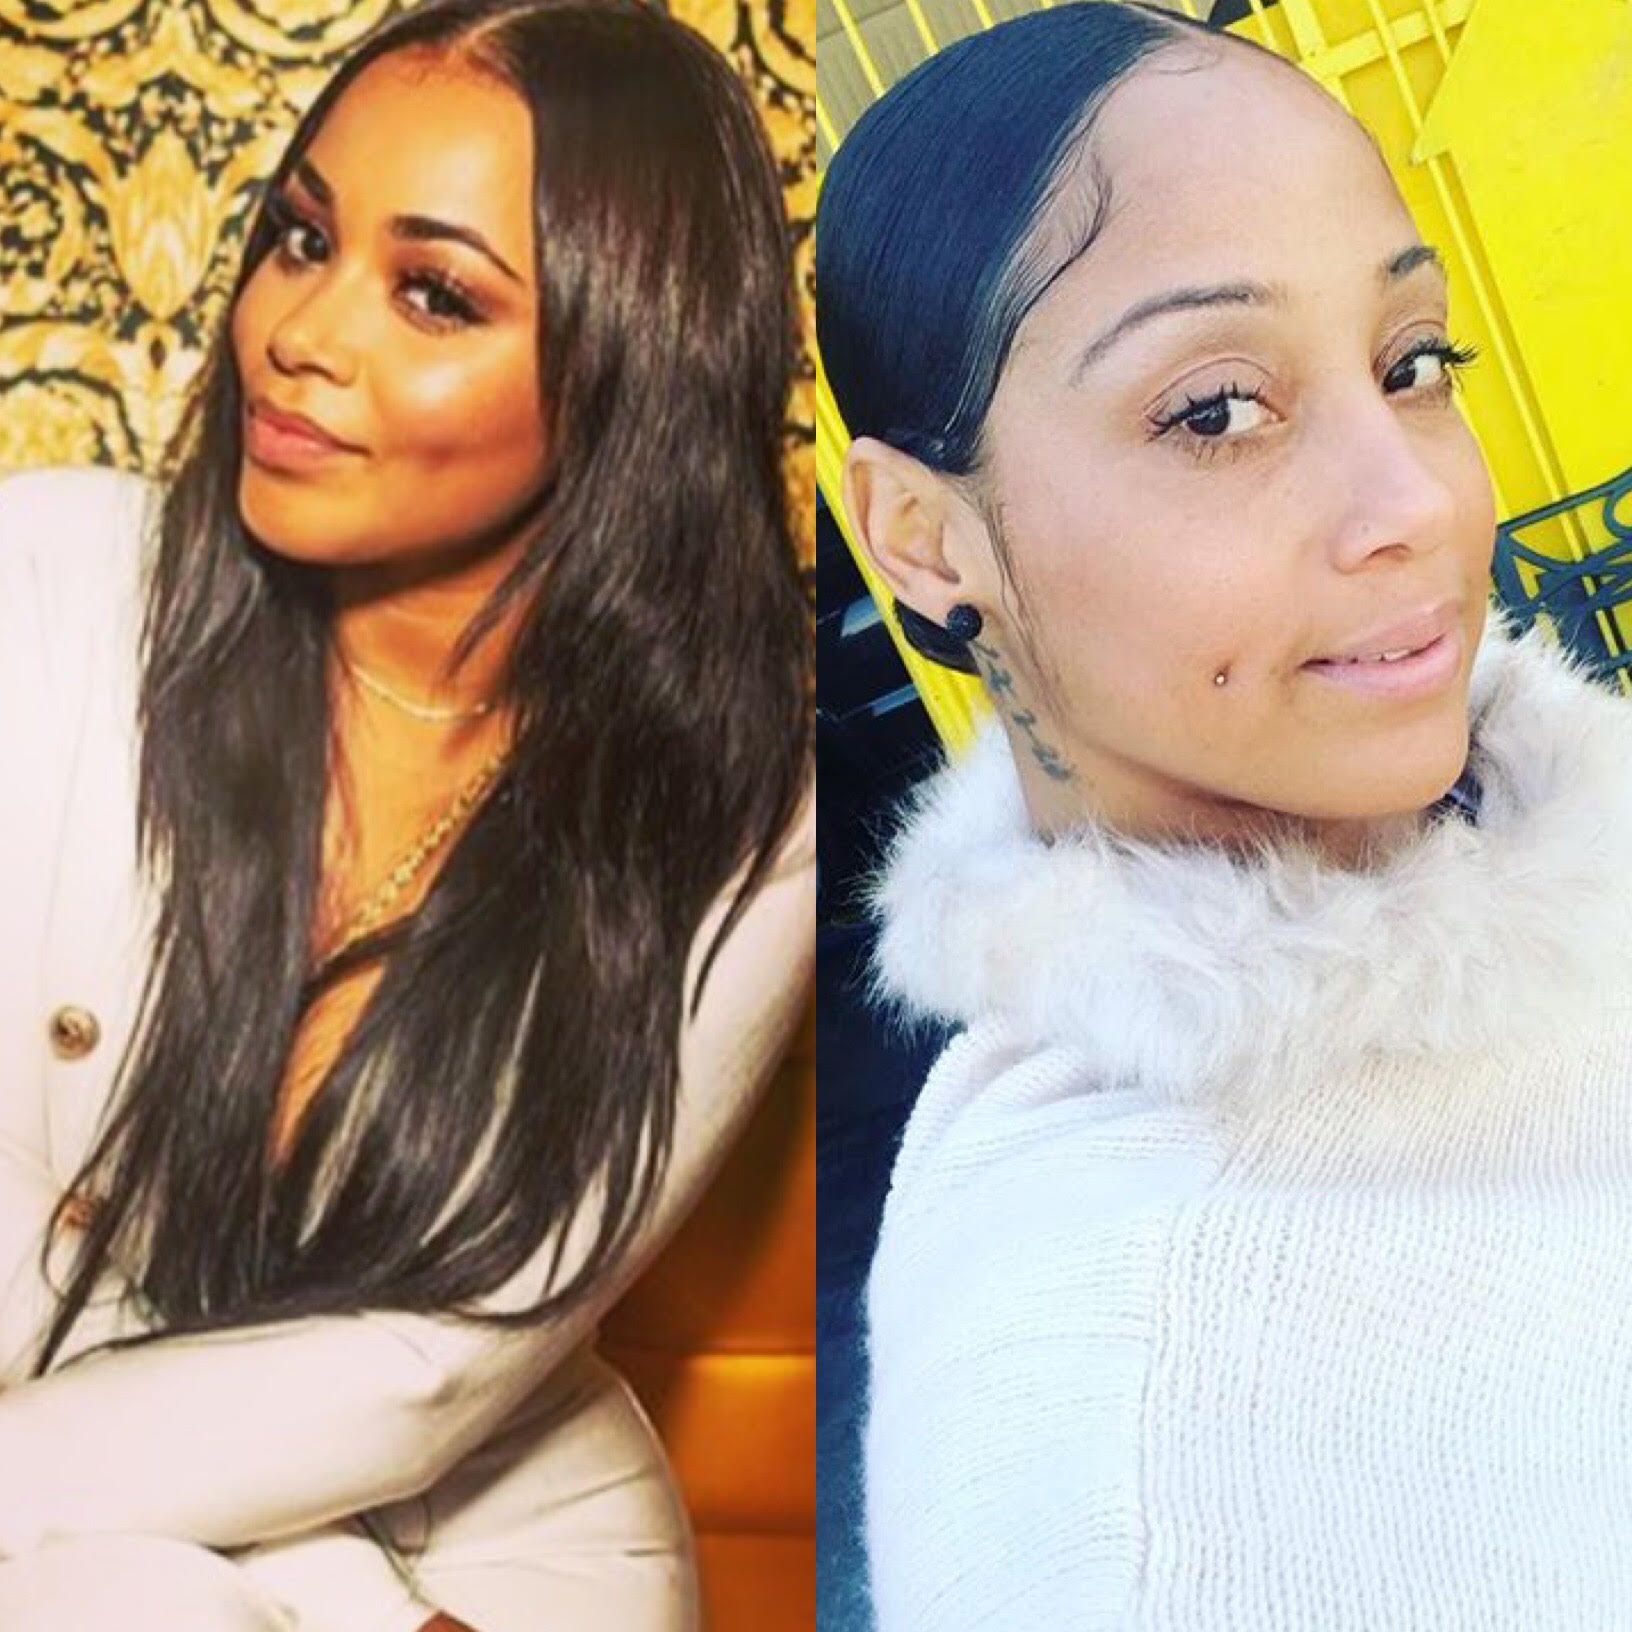 Lauren London and Nipsey Hussle attending the Can't Stop, Won't